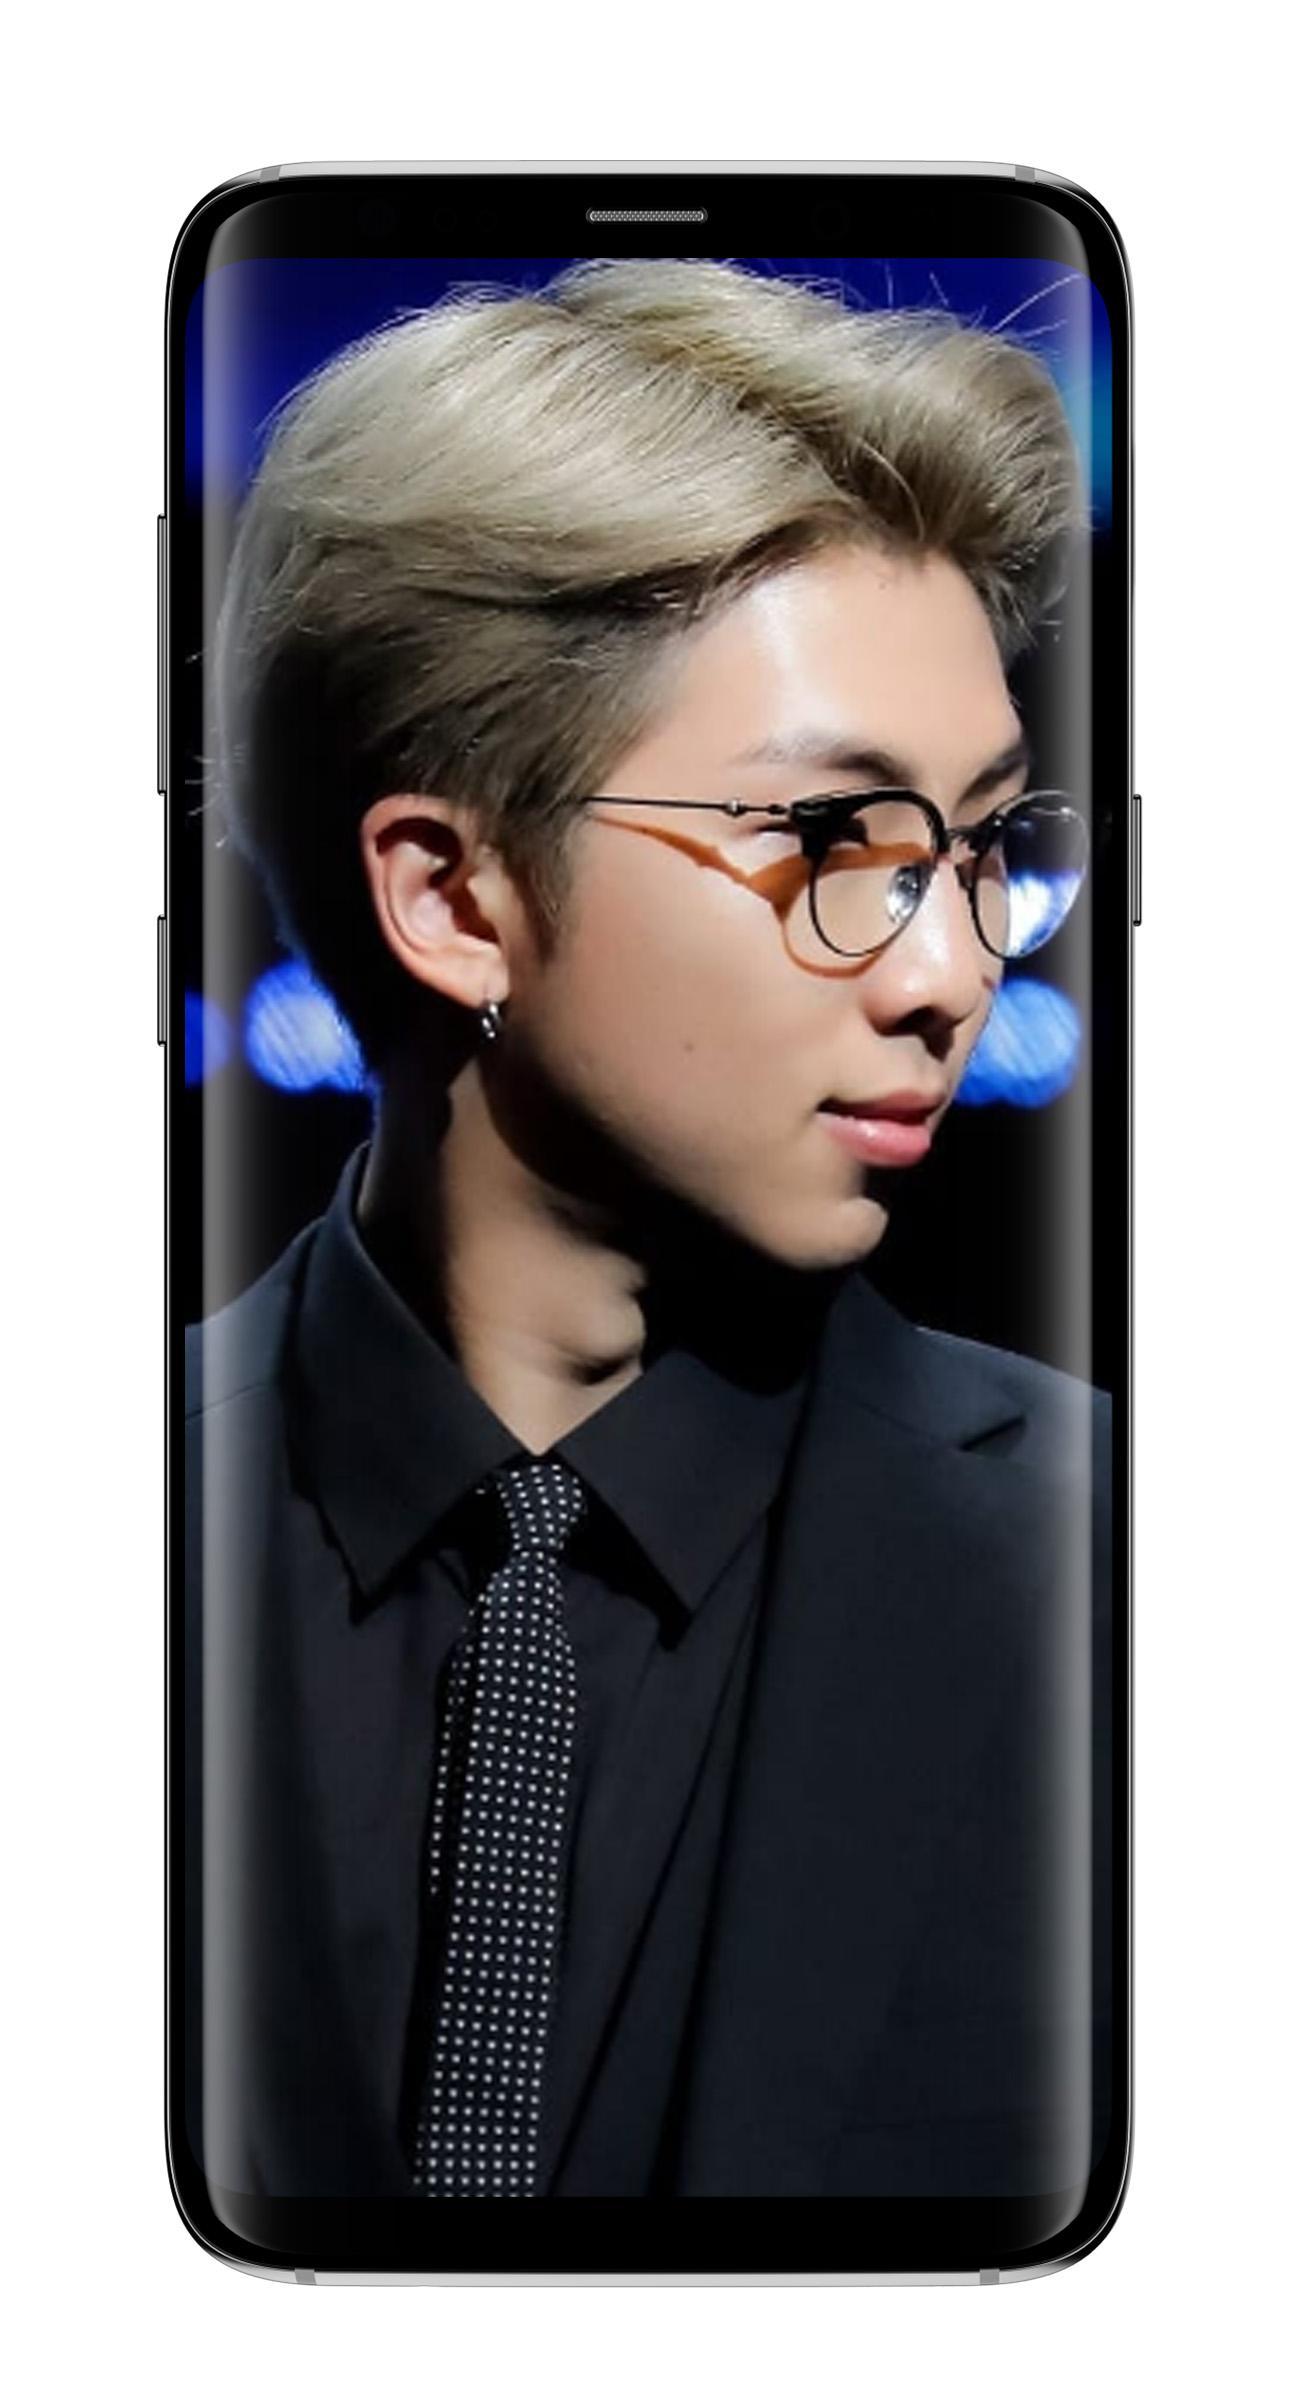 Rm Bts Wallpapers Hd 2020 For Android Apk Download - rm bts shirt roblox